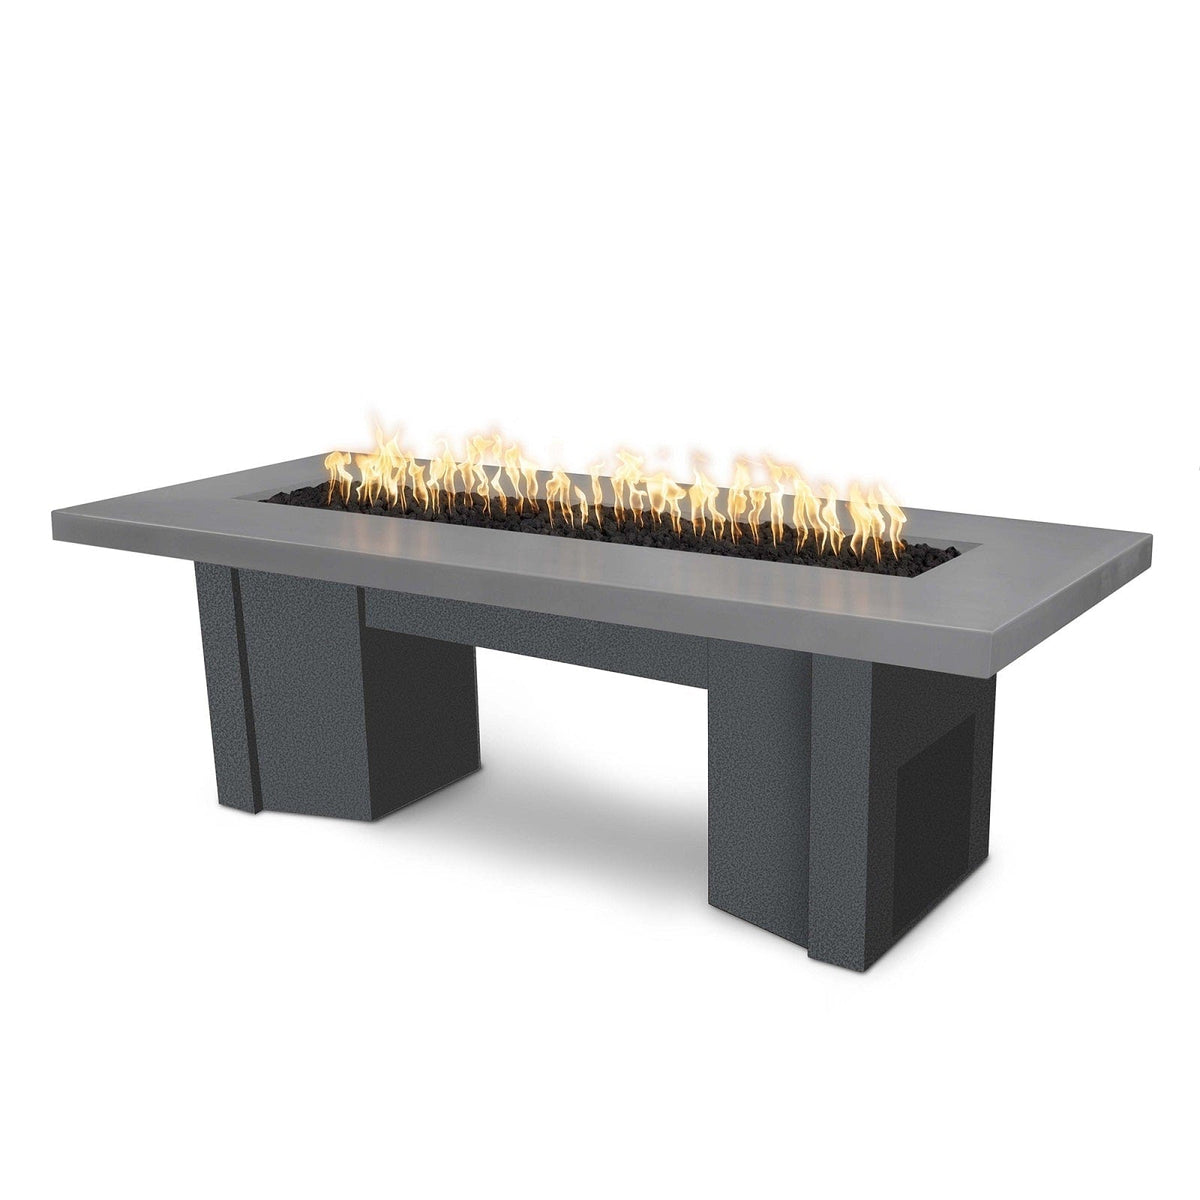 The Outdoor Plus Fire Features Natural Gray (-NGY) / Silver Vein Powder Coated Steel (-SLV) The Outdoor Plus 78&quot; Alameda Fire Table Smooth Concrete in Natural Gas - Match Lit / OPT-ALMGFRC78-NG